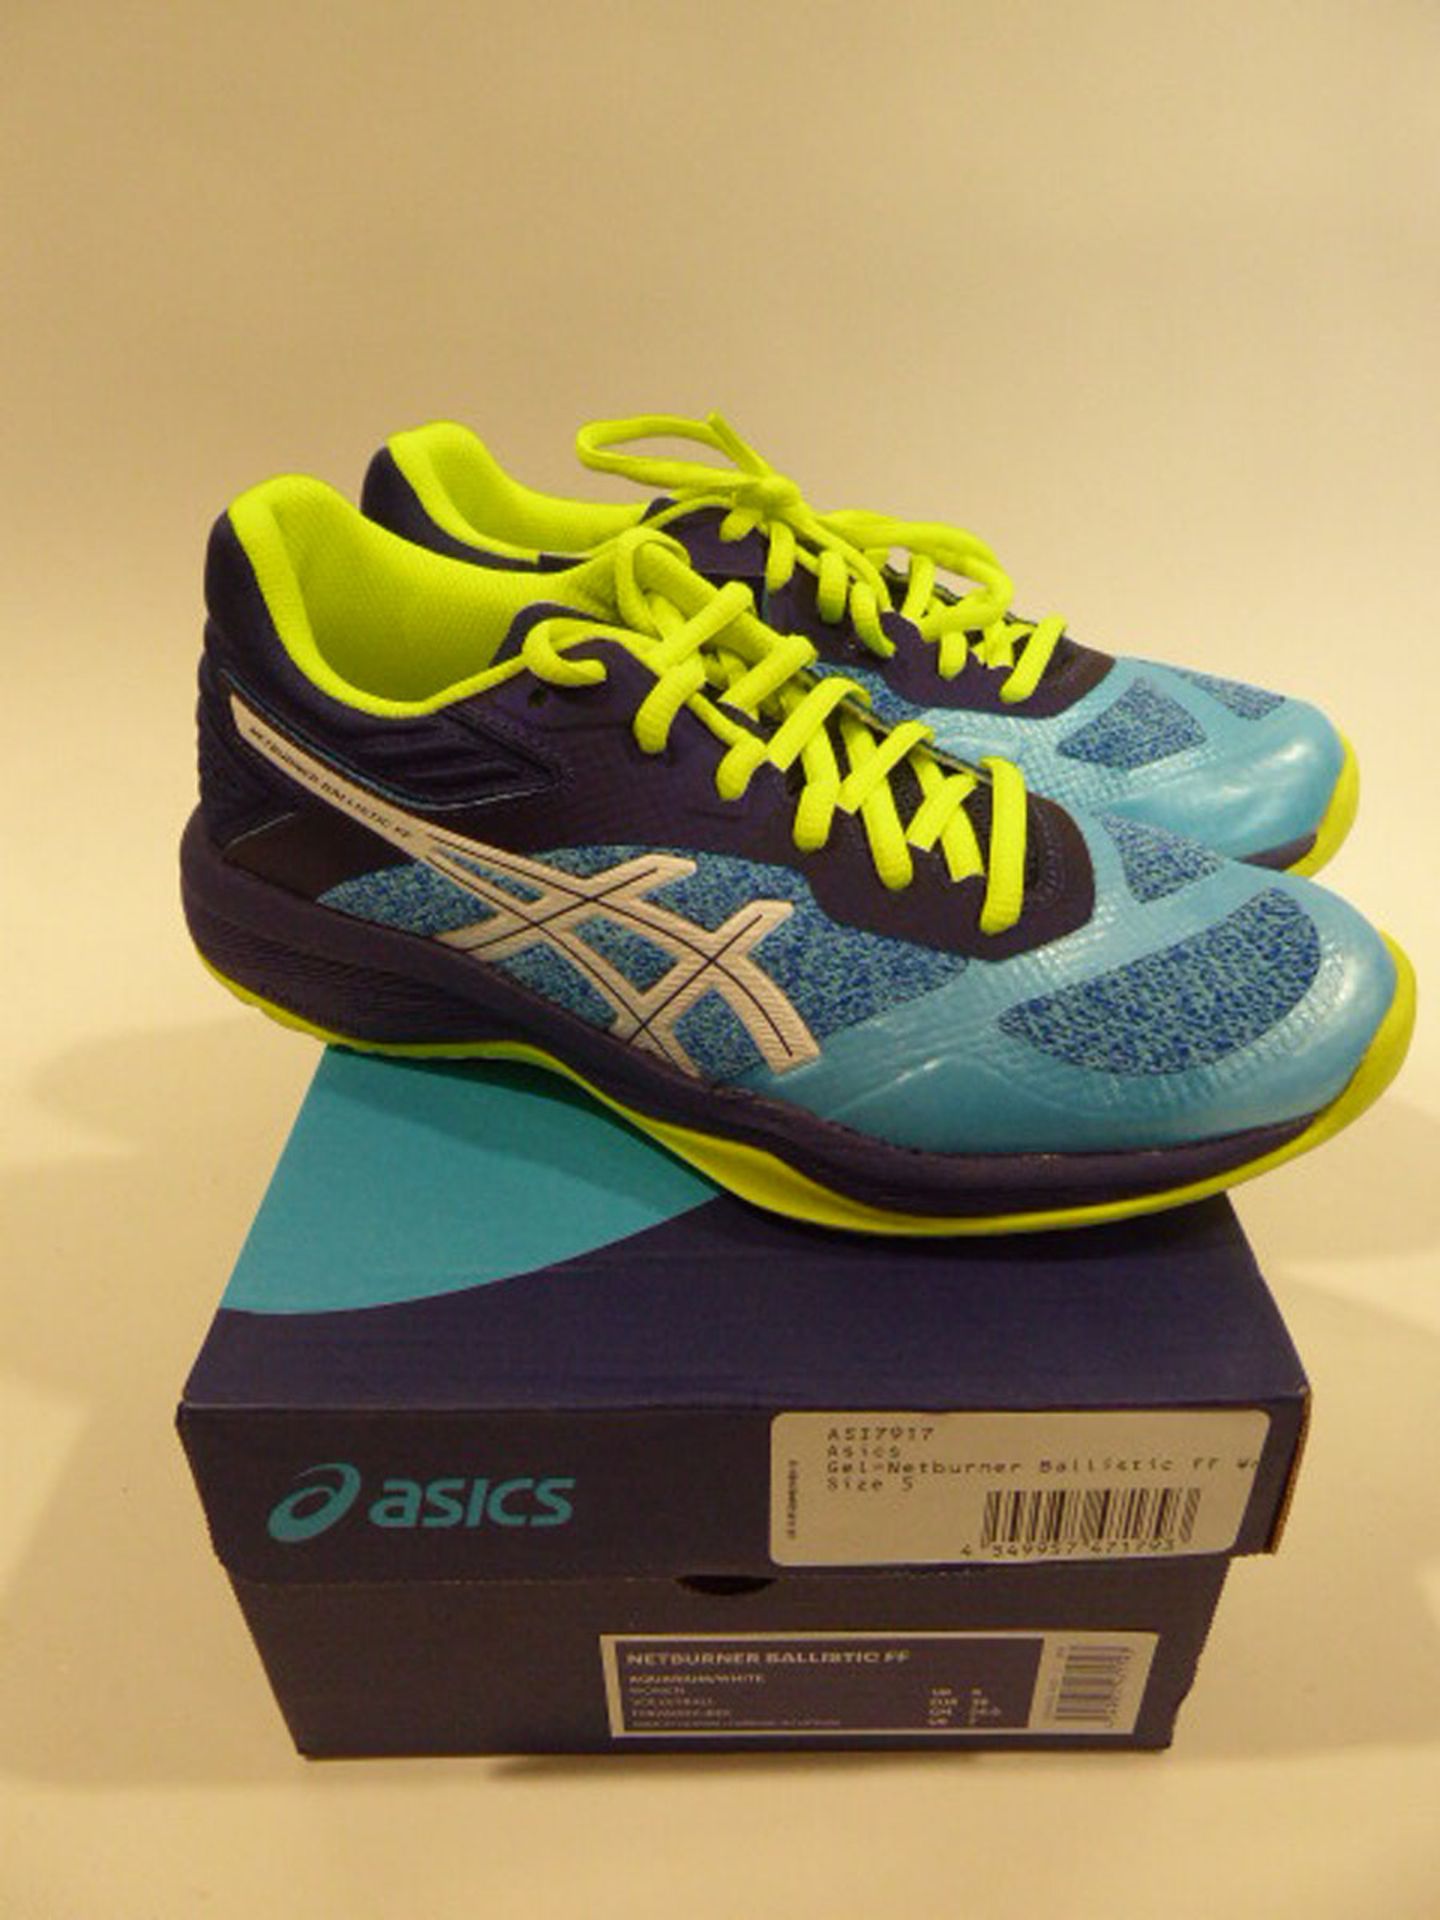 Asics Patriot 11 womens trainers size 4 and a pair of Asics Netburner Ballistic FF trainers size 5 - Image 4 of 5